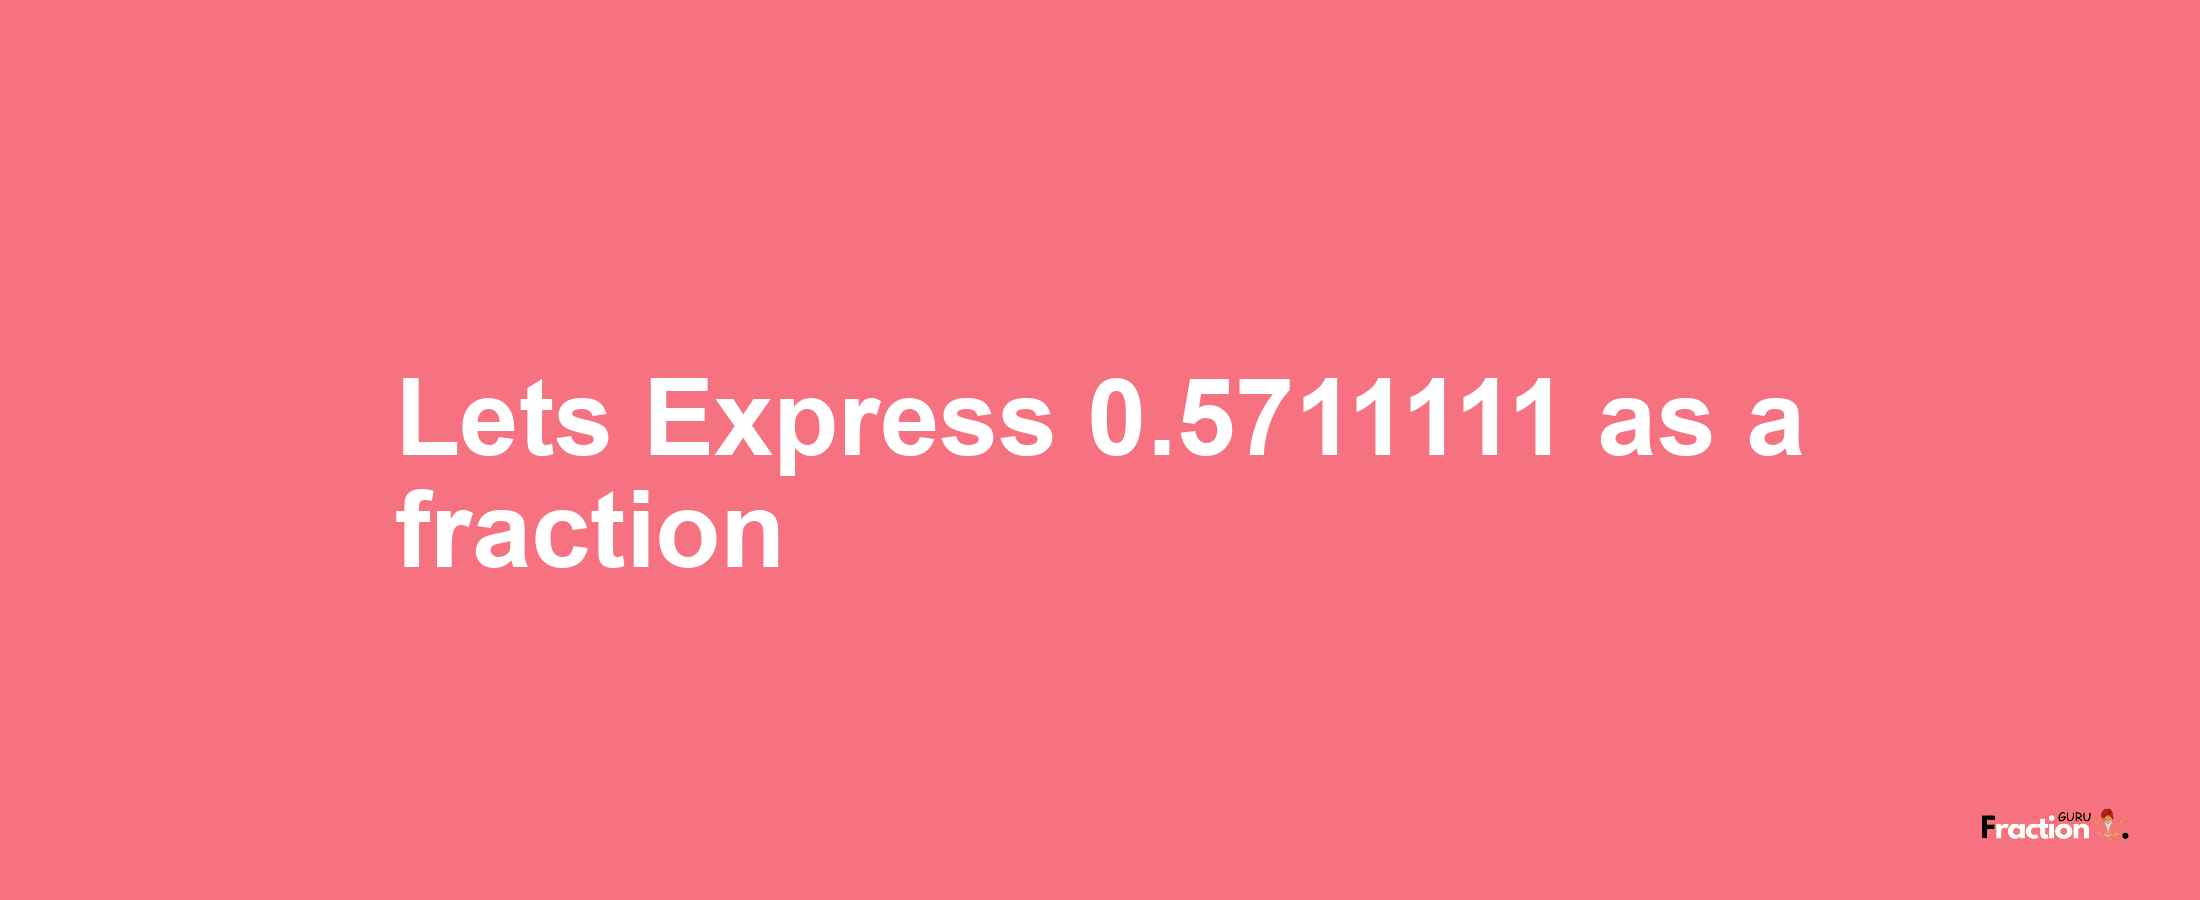 Lets Express 0.5711111 as afraction